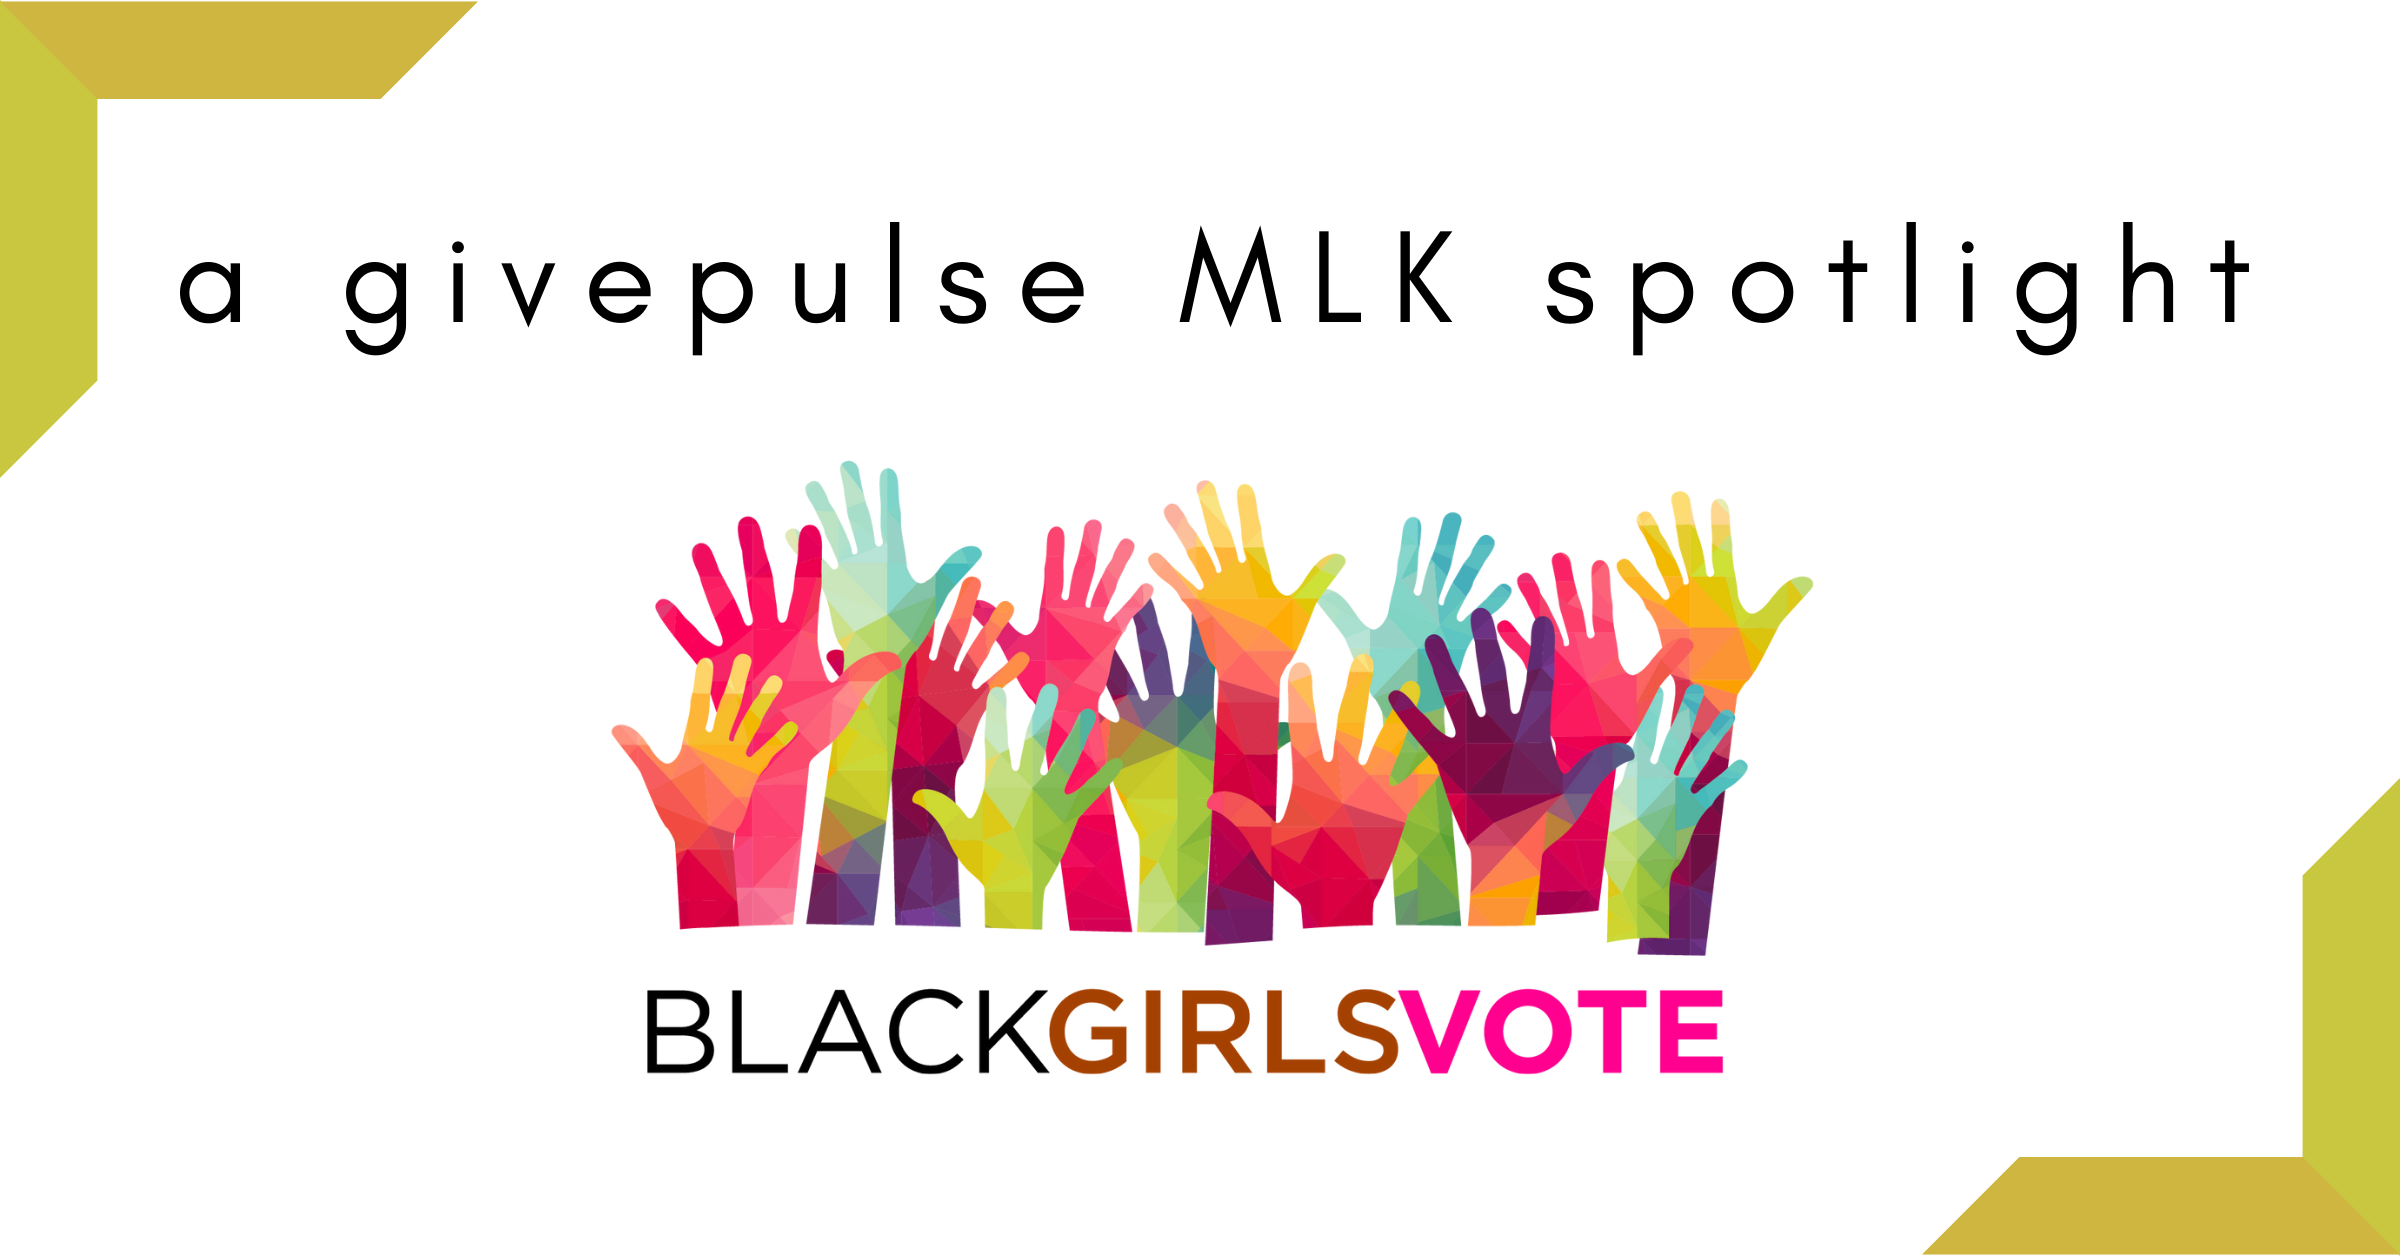 Black Girls Vote: Changing the World Through Advocacy - GivePulse Blog